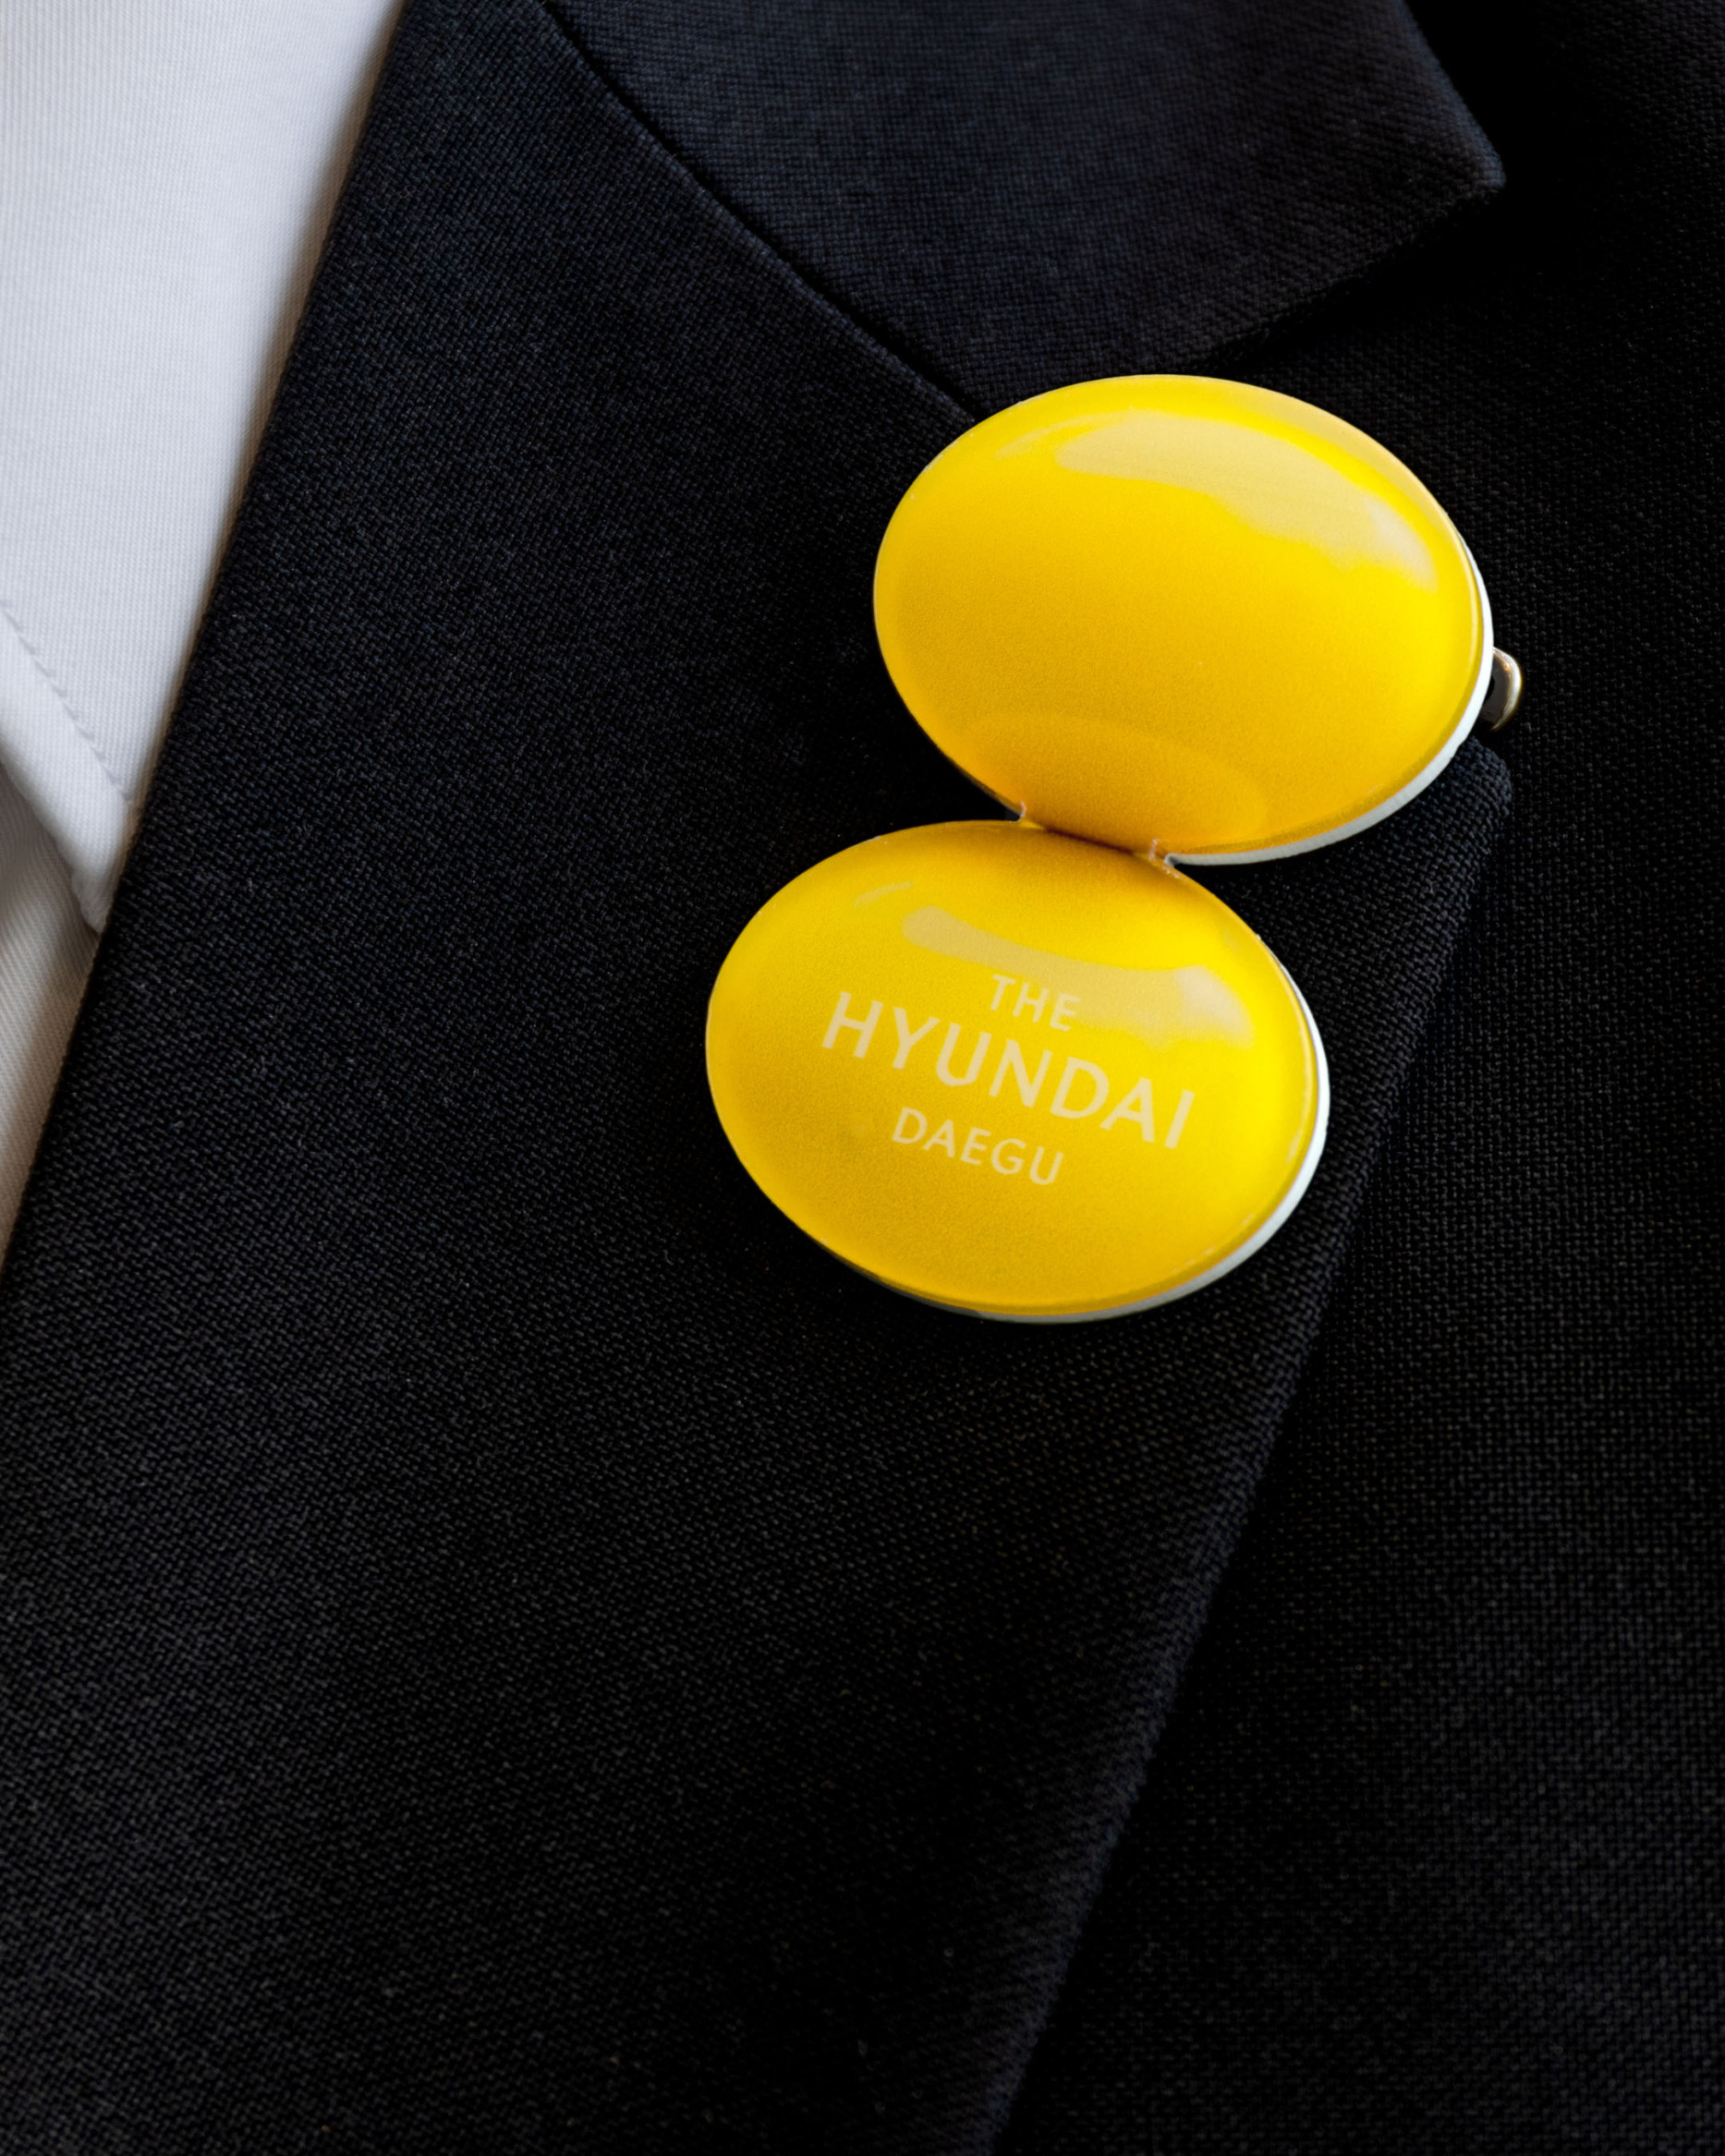 Colourful pin as part of a campaign for the Hyundai Department Store in Daegu.